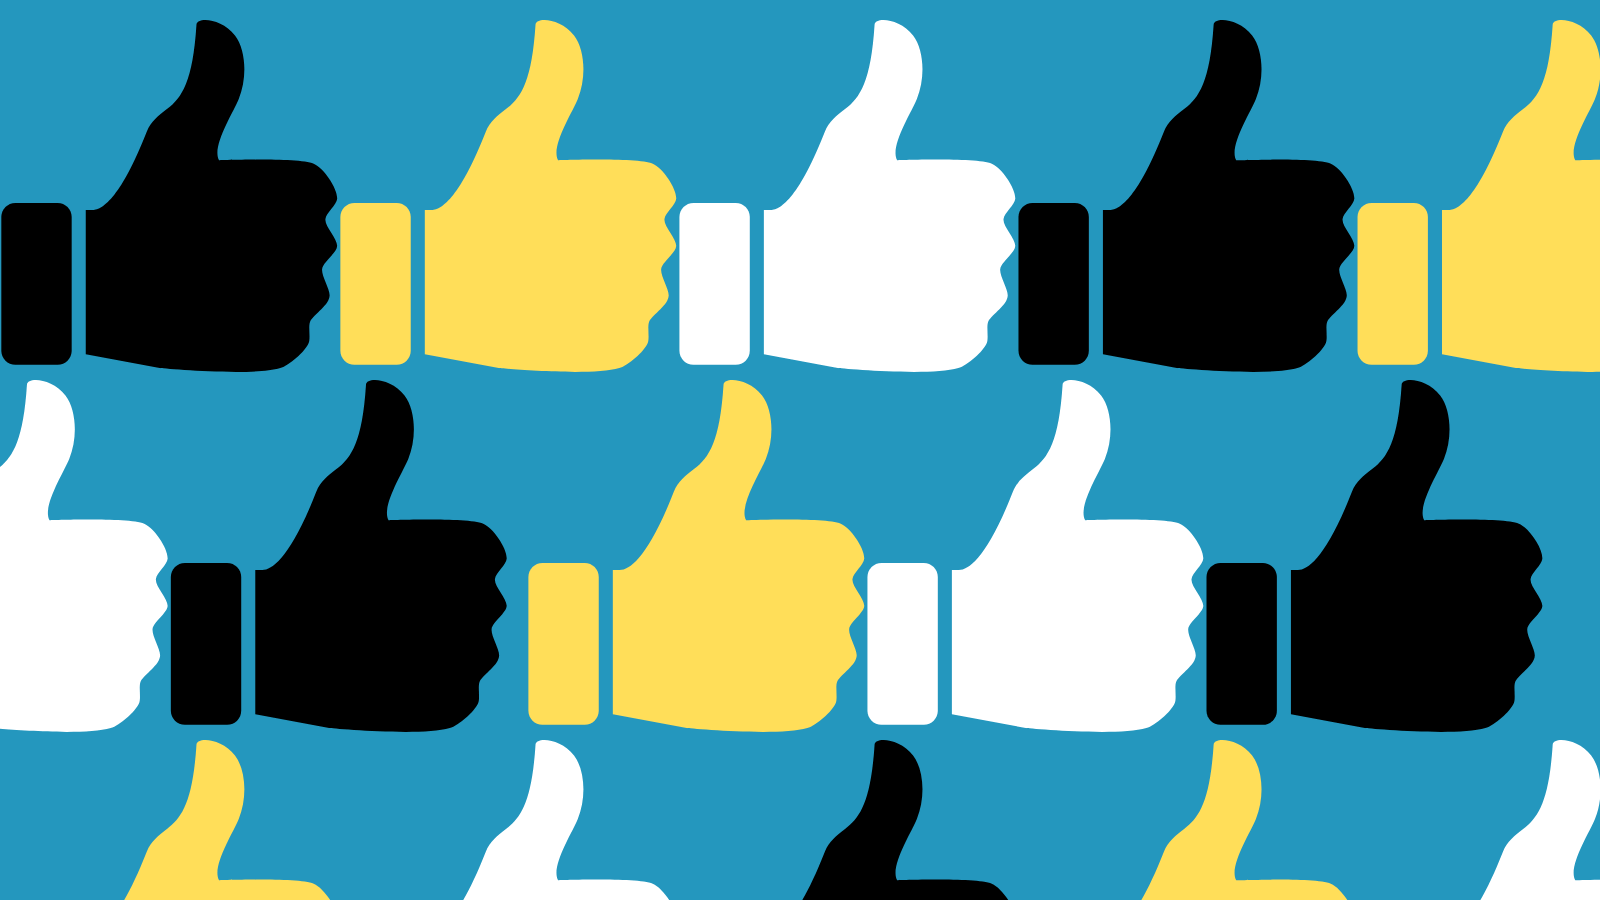 Thumbs Up in a repeating pattern